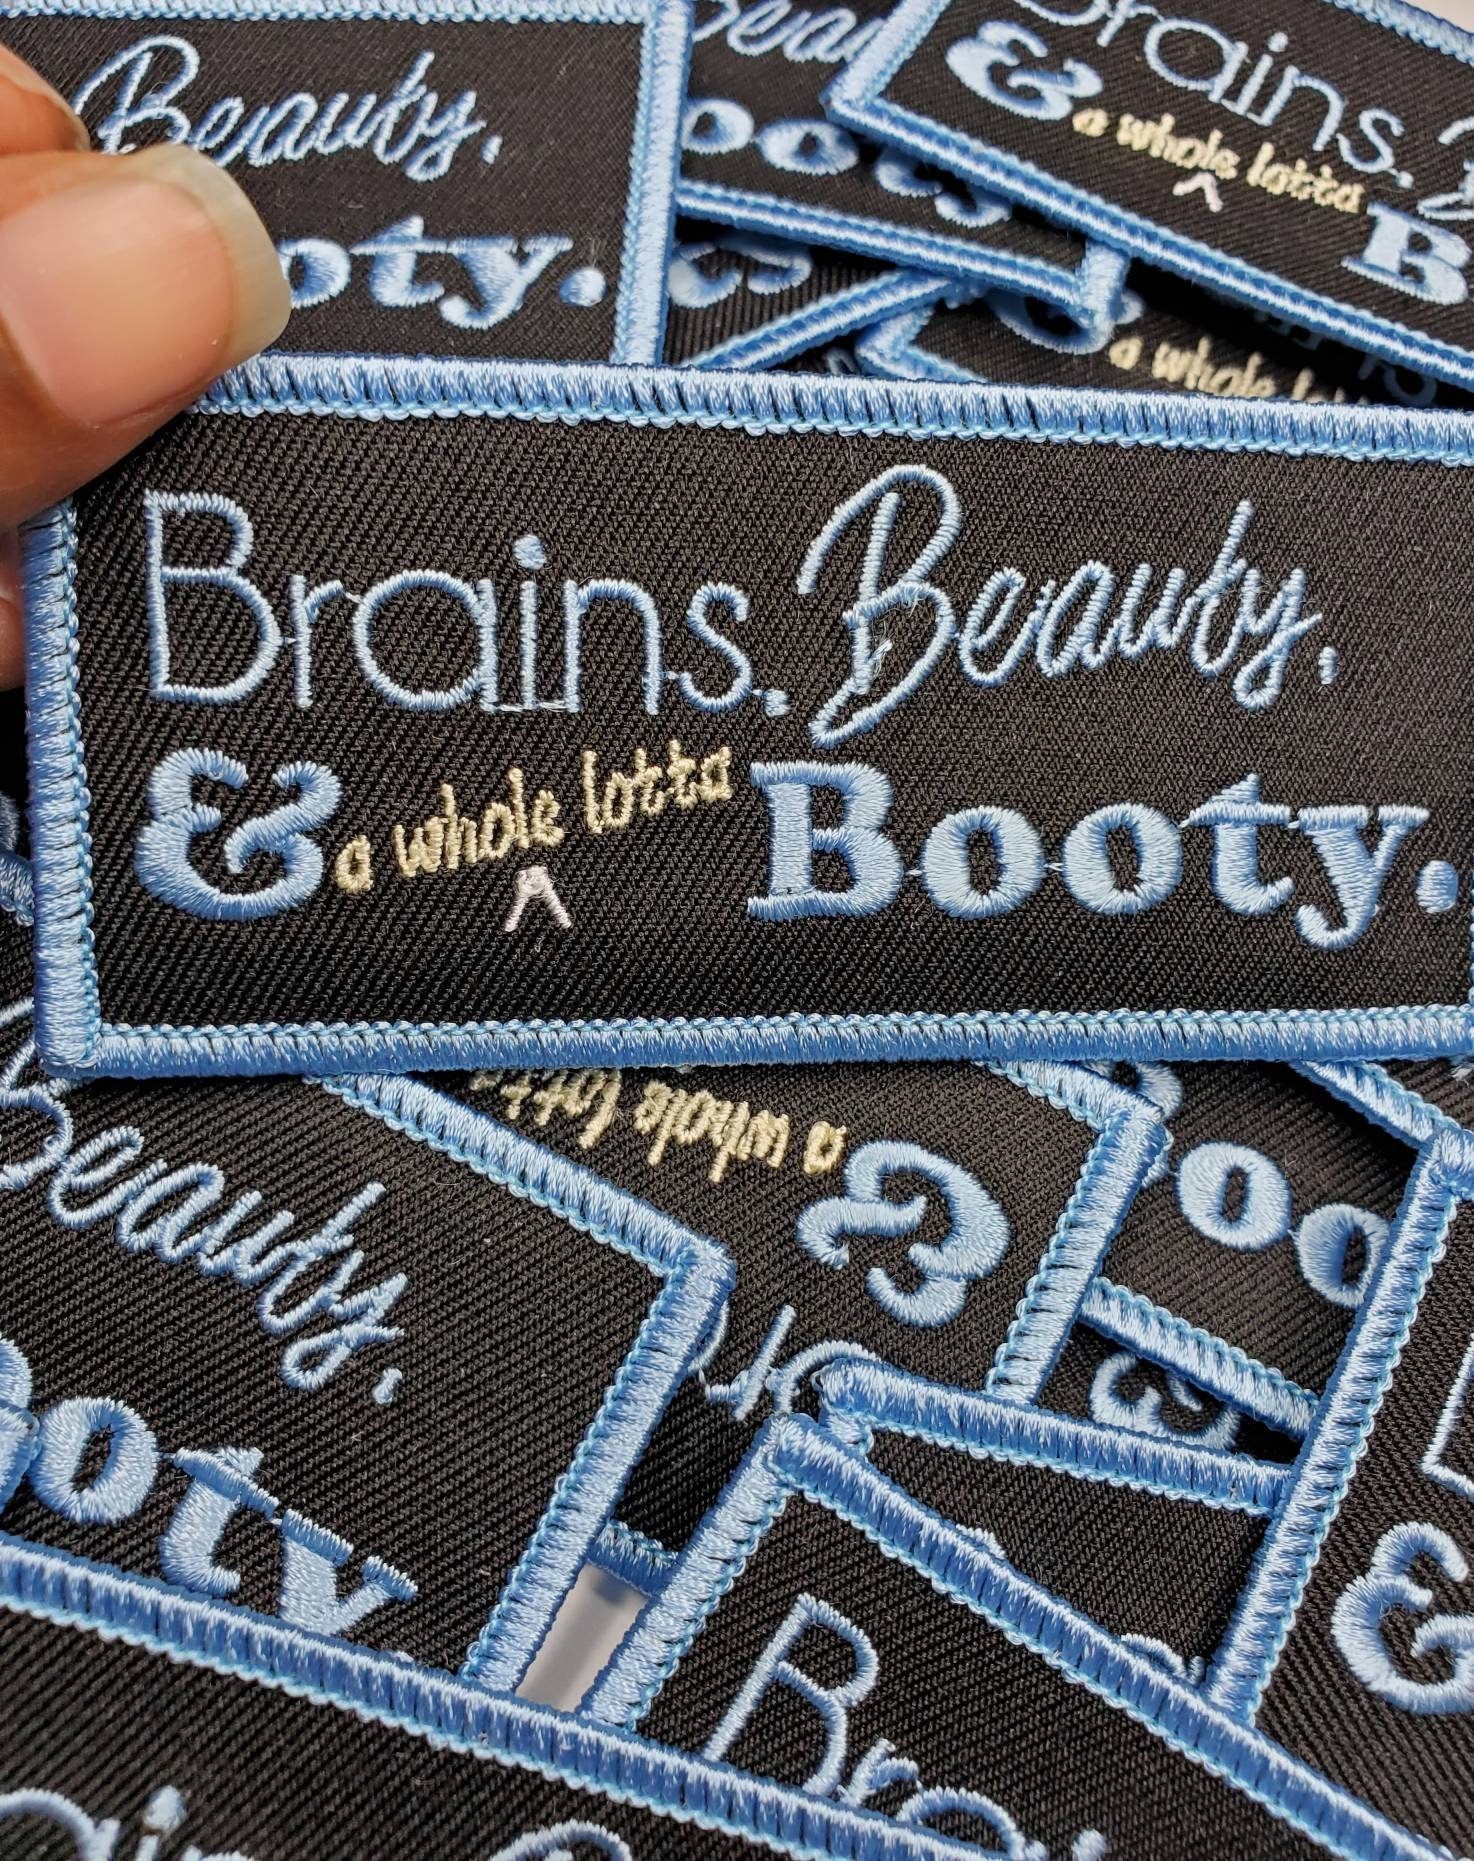 Baby Blue Iron-on Patch, Size 3x2-inch, Funny "Brains, Beauty, and a whole lotta Booty" Embroidered Patch for Clothing and Accessories